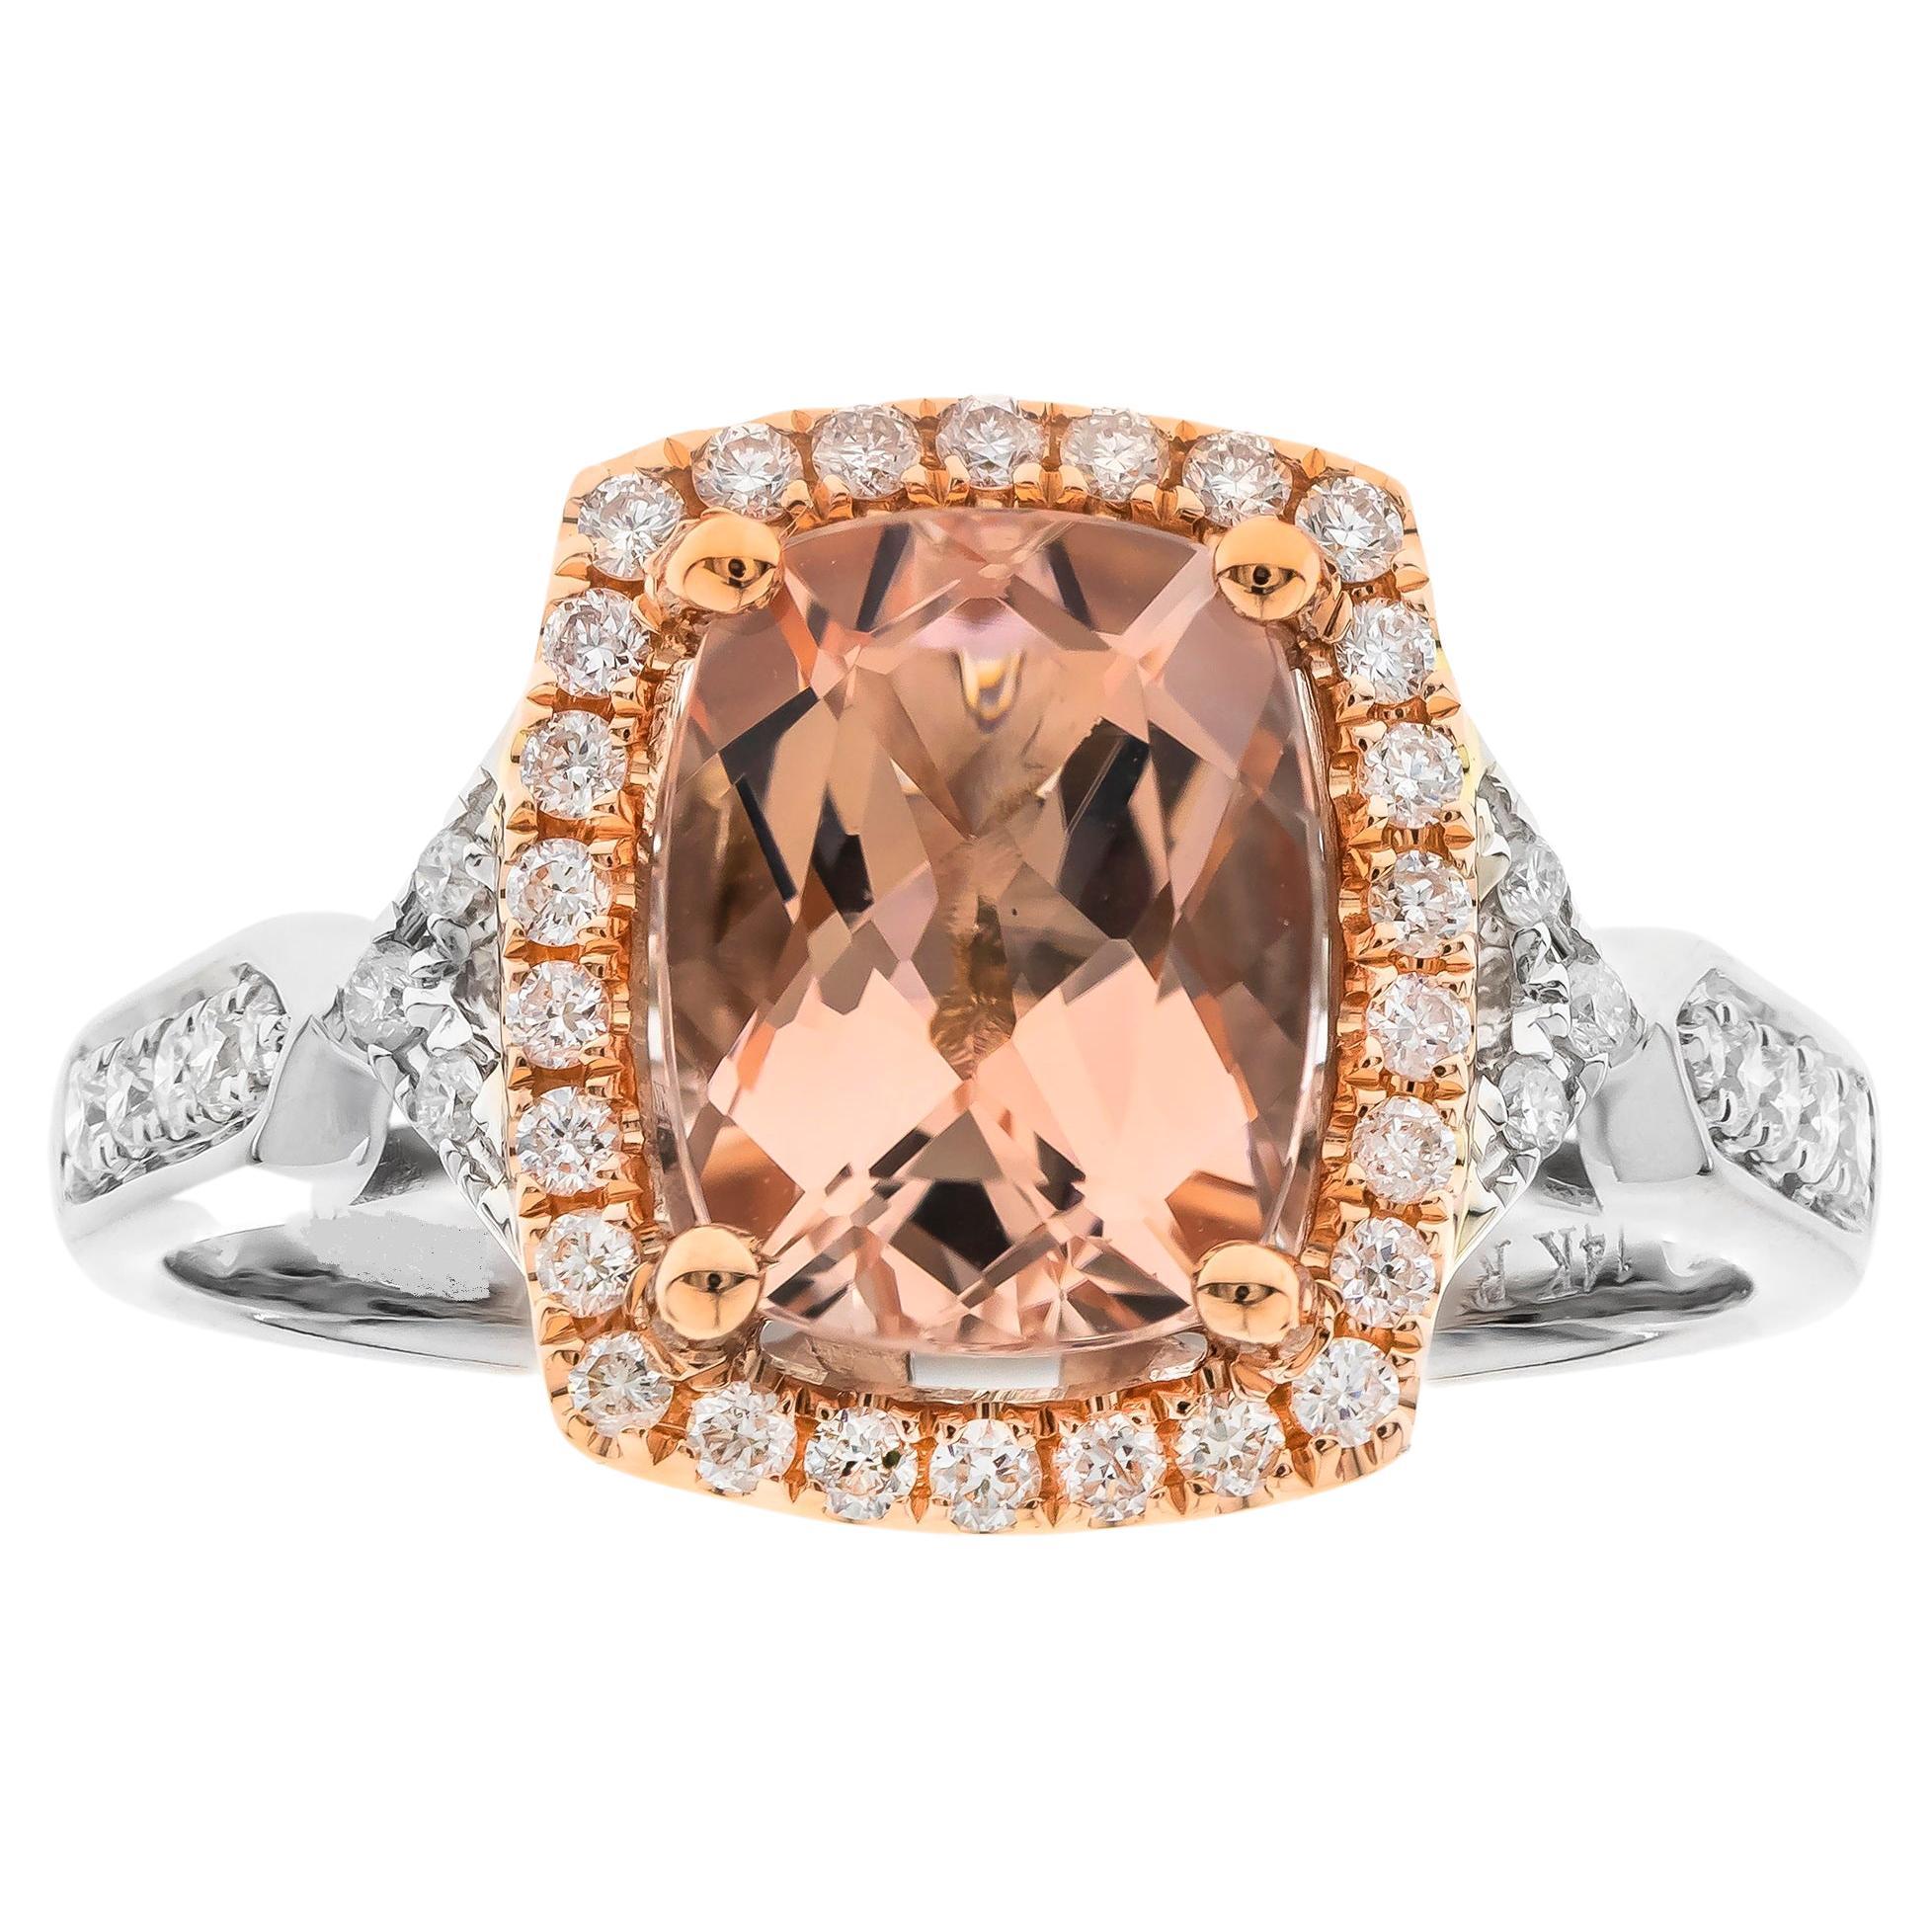 1.91 Carat Cushion-Cut Morganite Diamond Accents 14K White Gold Ring For Sale